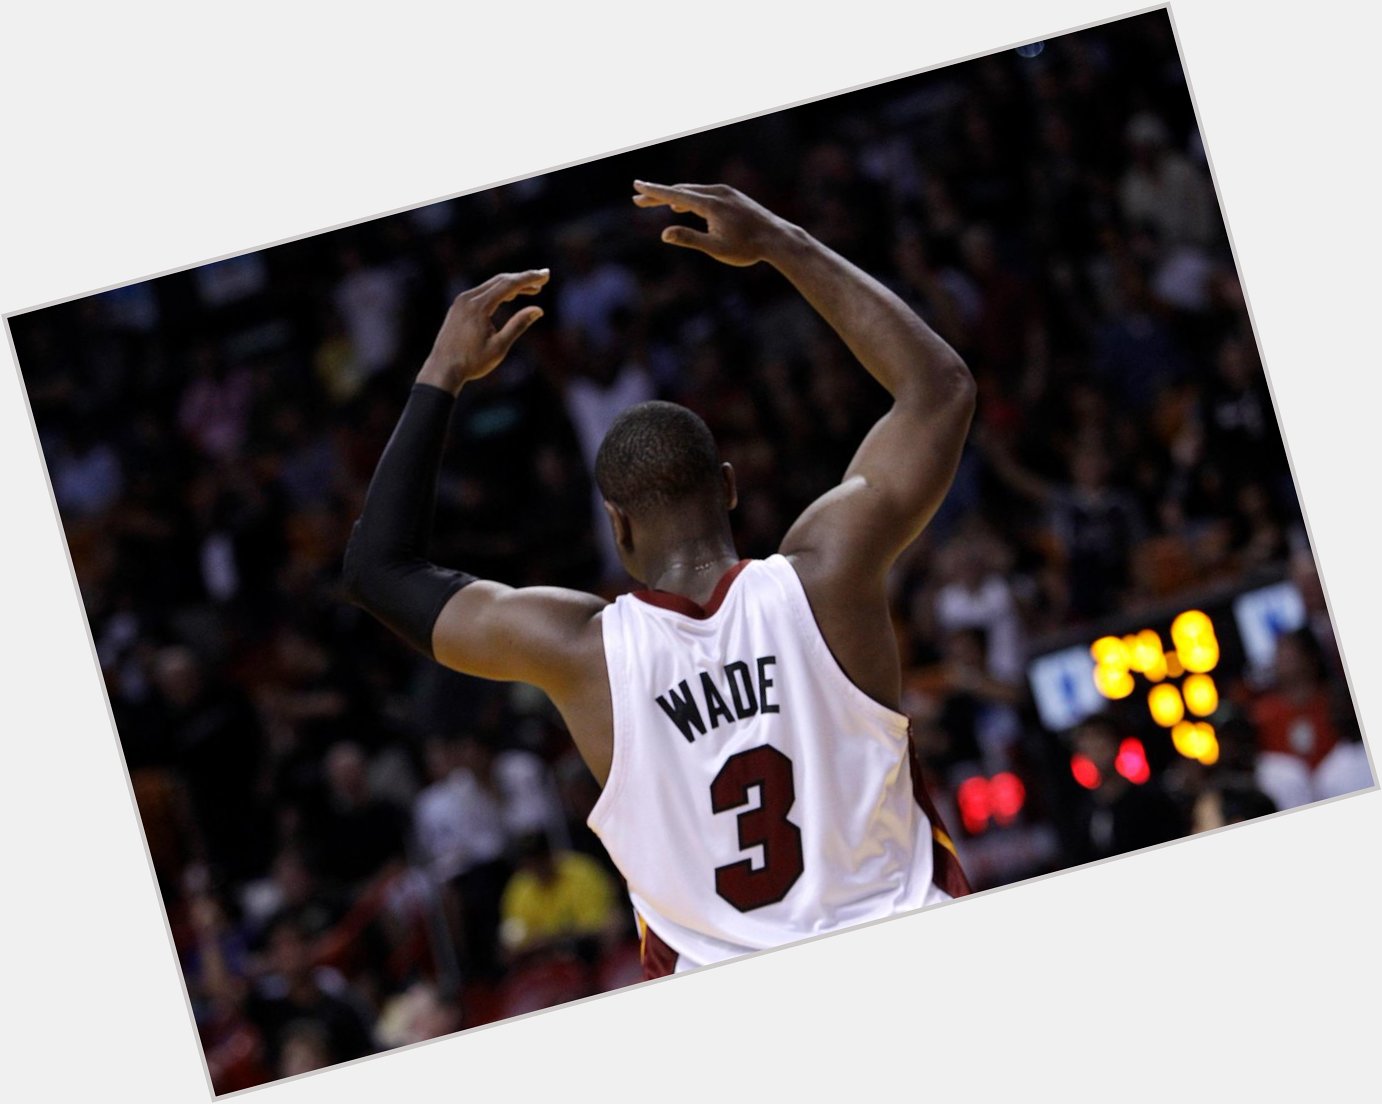 He wears 3, has 3 rings, calls himself \"Three\" and turns 33 today. Happy birthday, Dwyane Wade. 